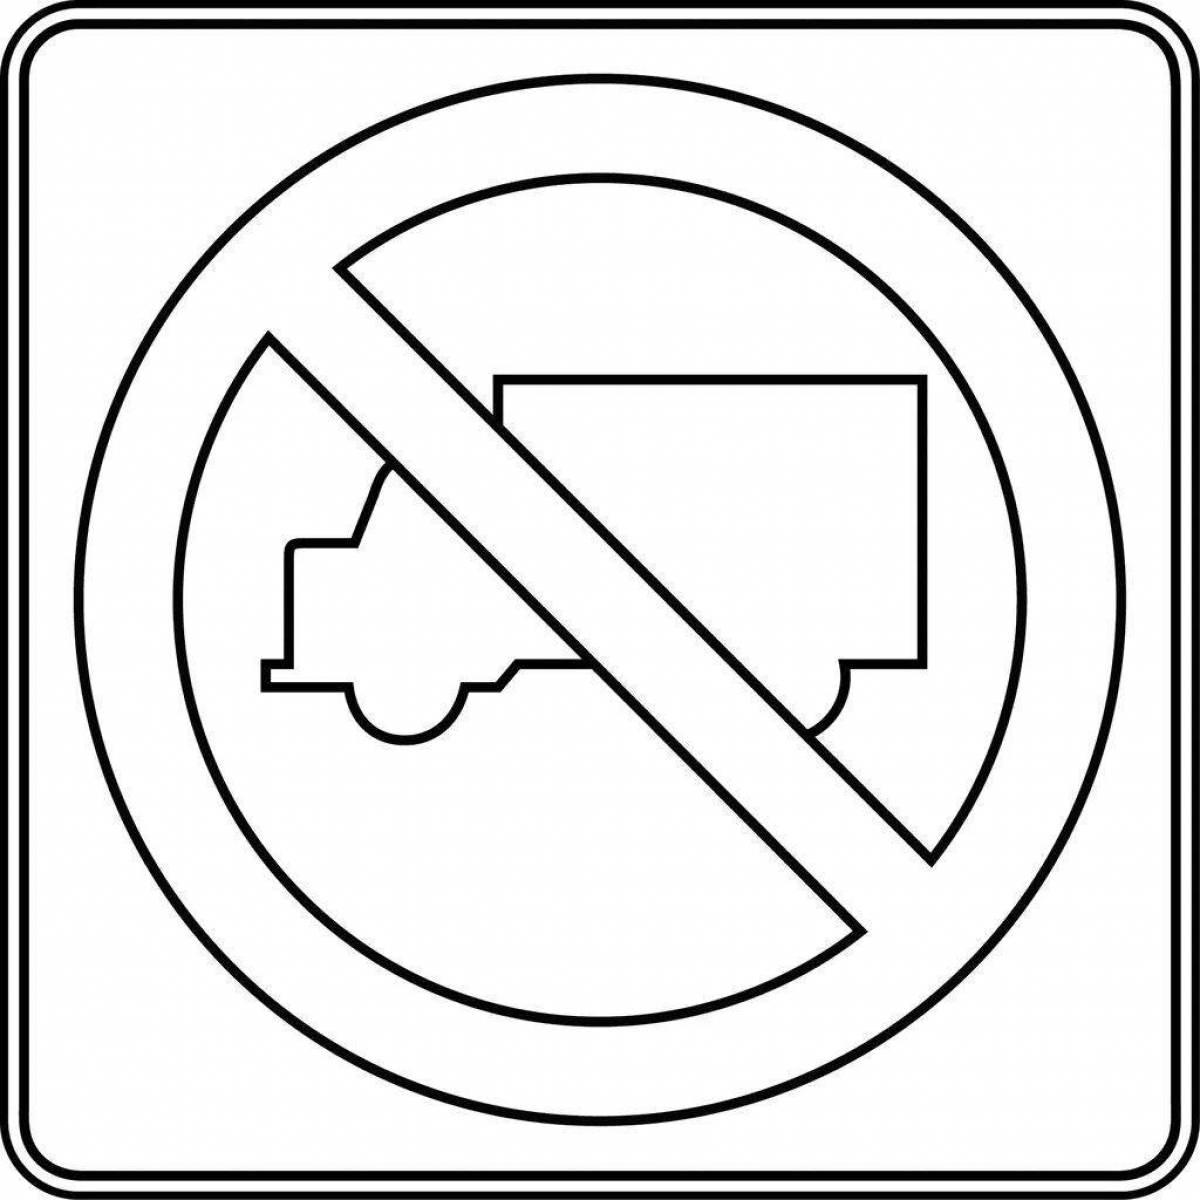 Colorful No Pedestrian Traffic Sign Coloring Page